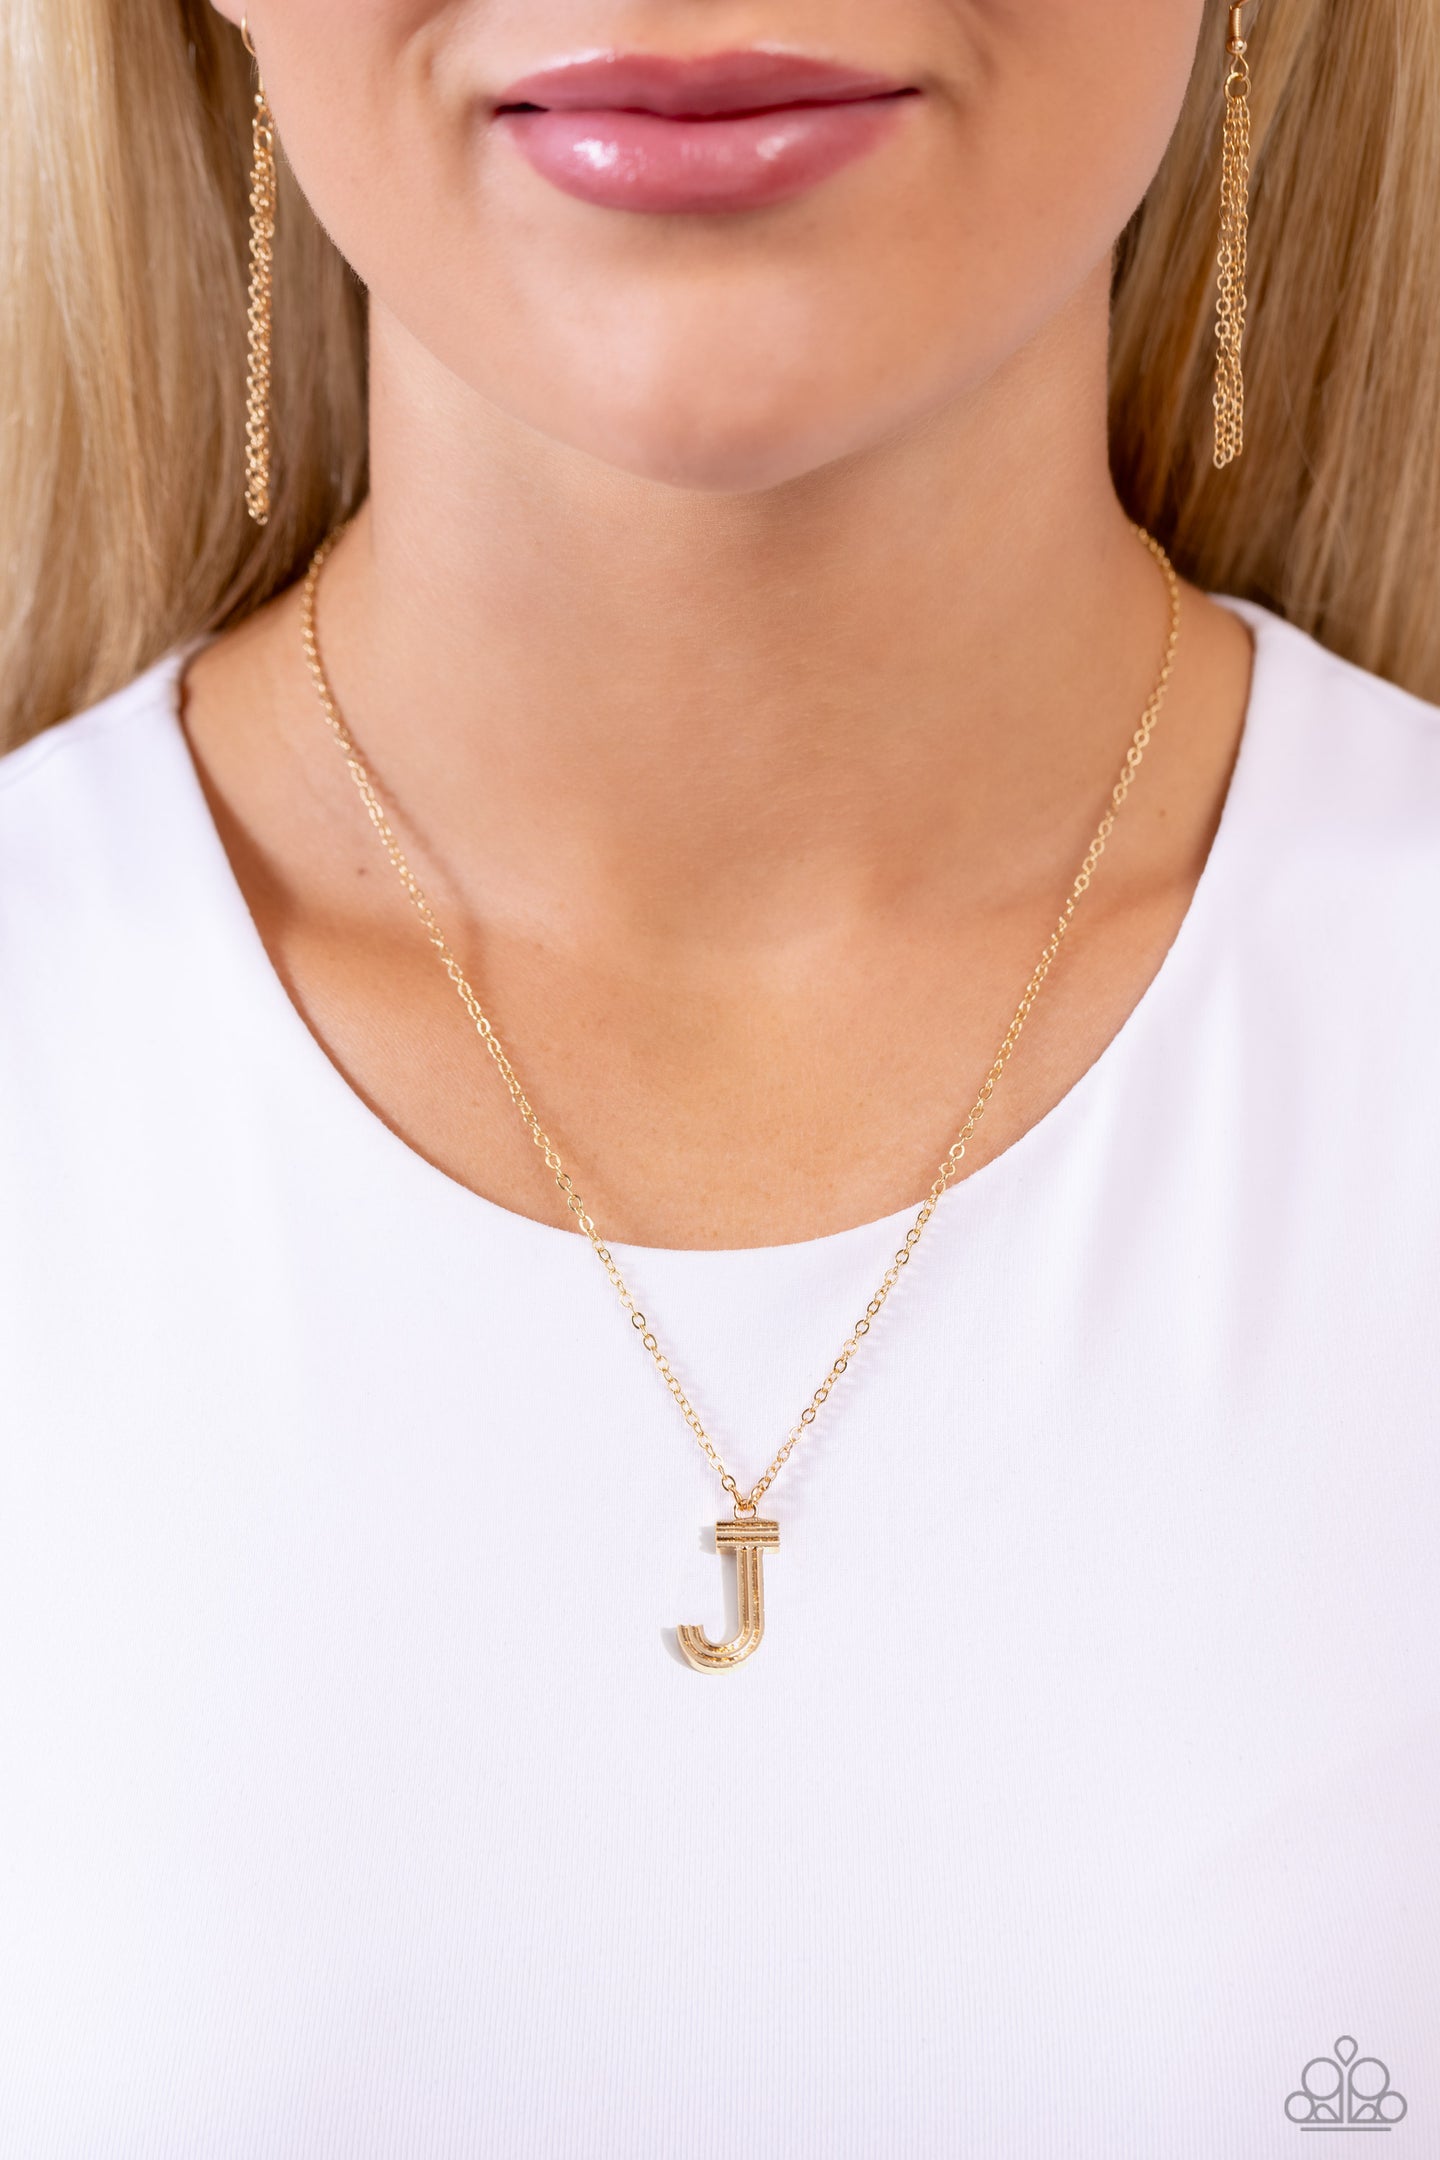 Leave Your Initials - Gold - J necklace